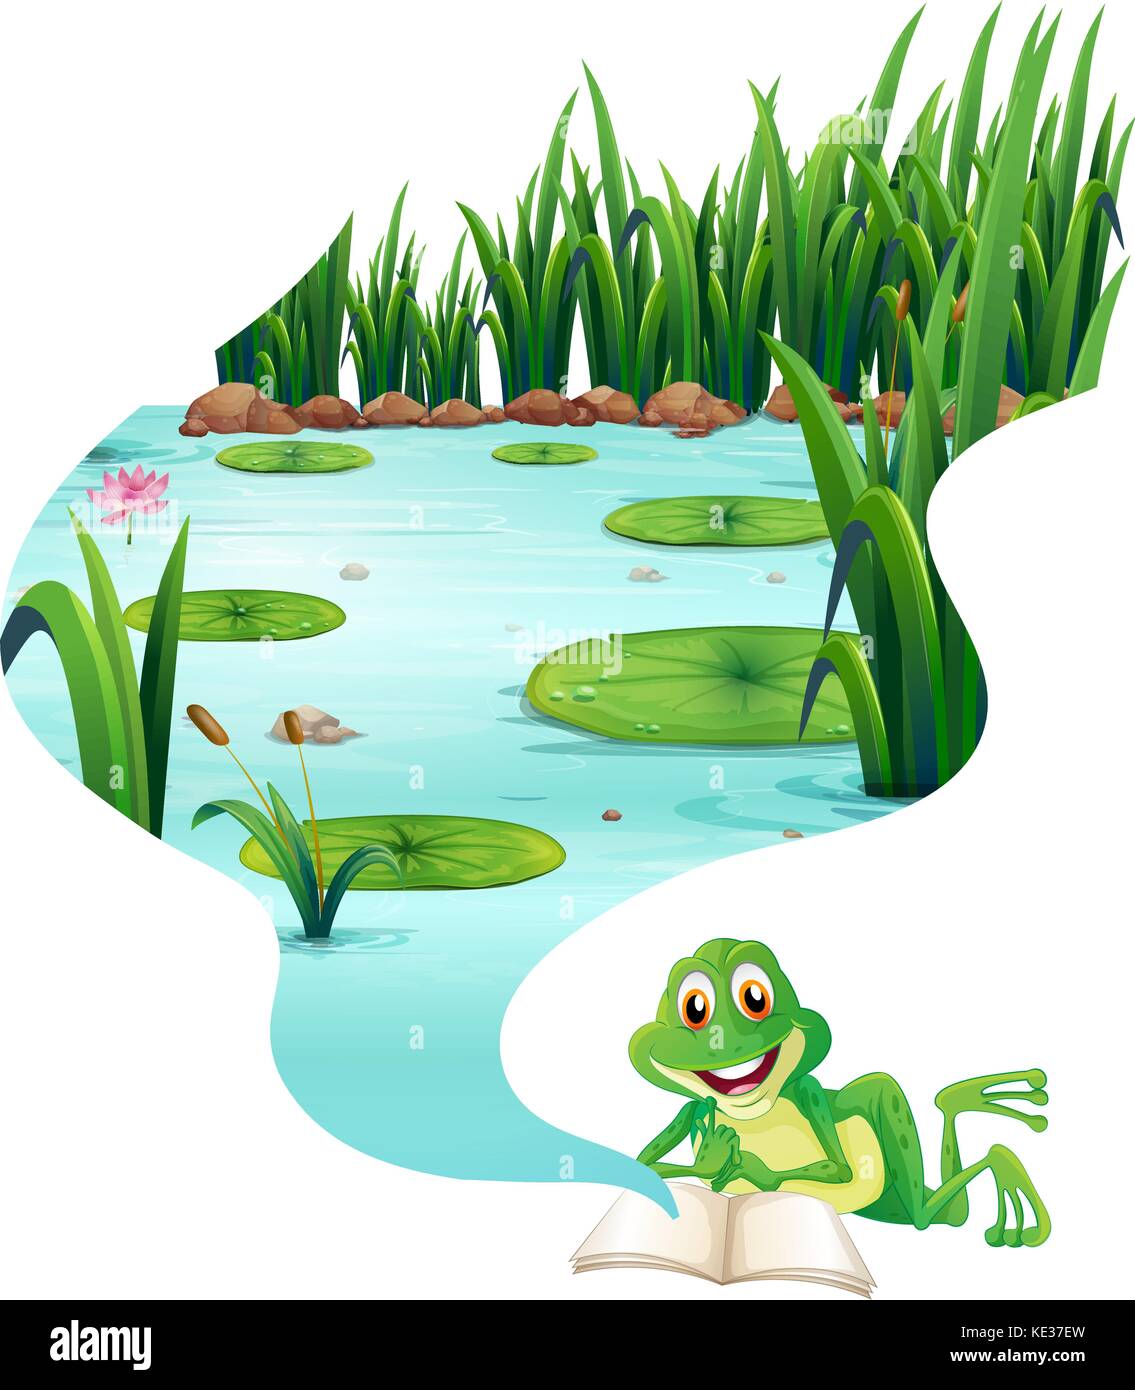 Frog reading book about the pond illustration Stock Vector